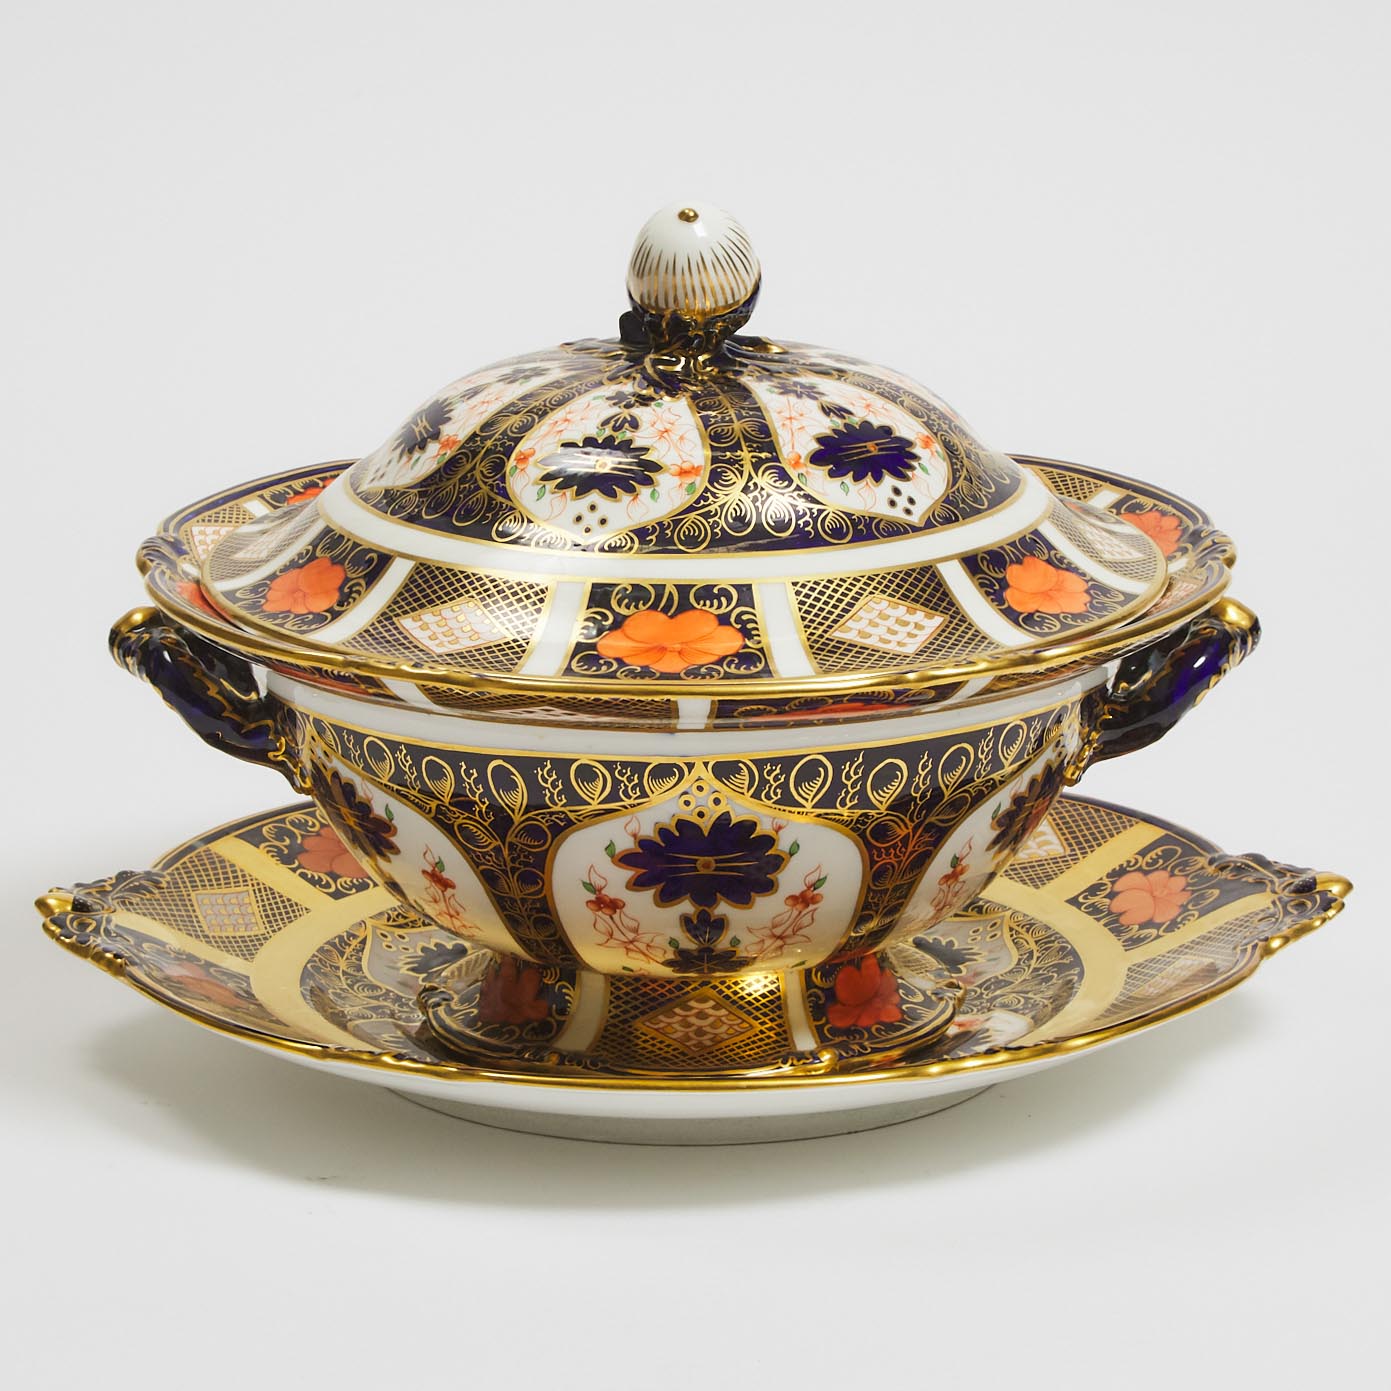 Royal Crown Derby 'Imari' (1128) Pattern Covered Soup Tureen on Stand, 20th century